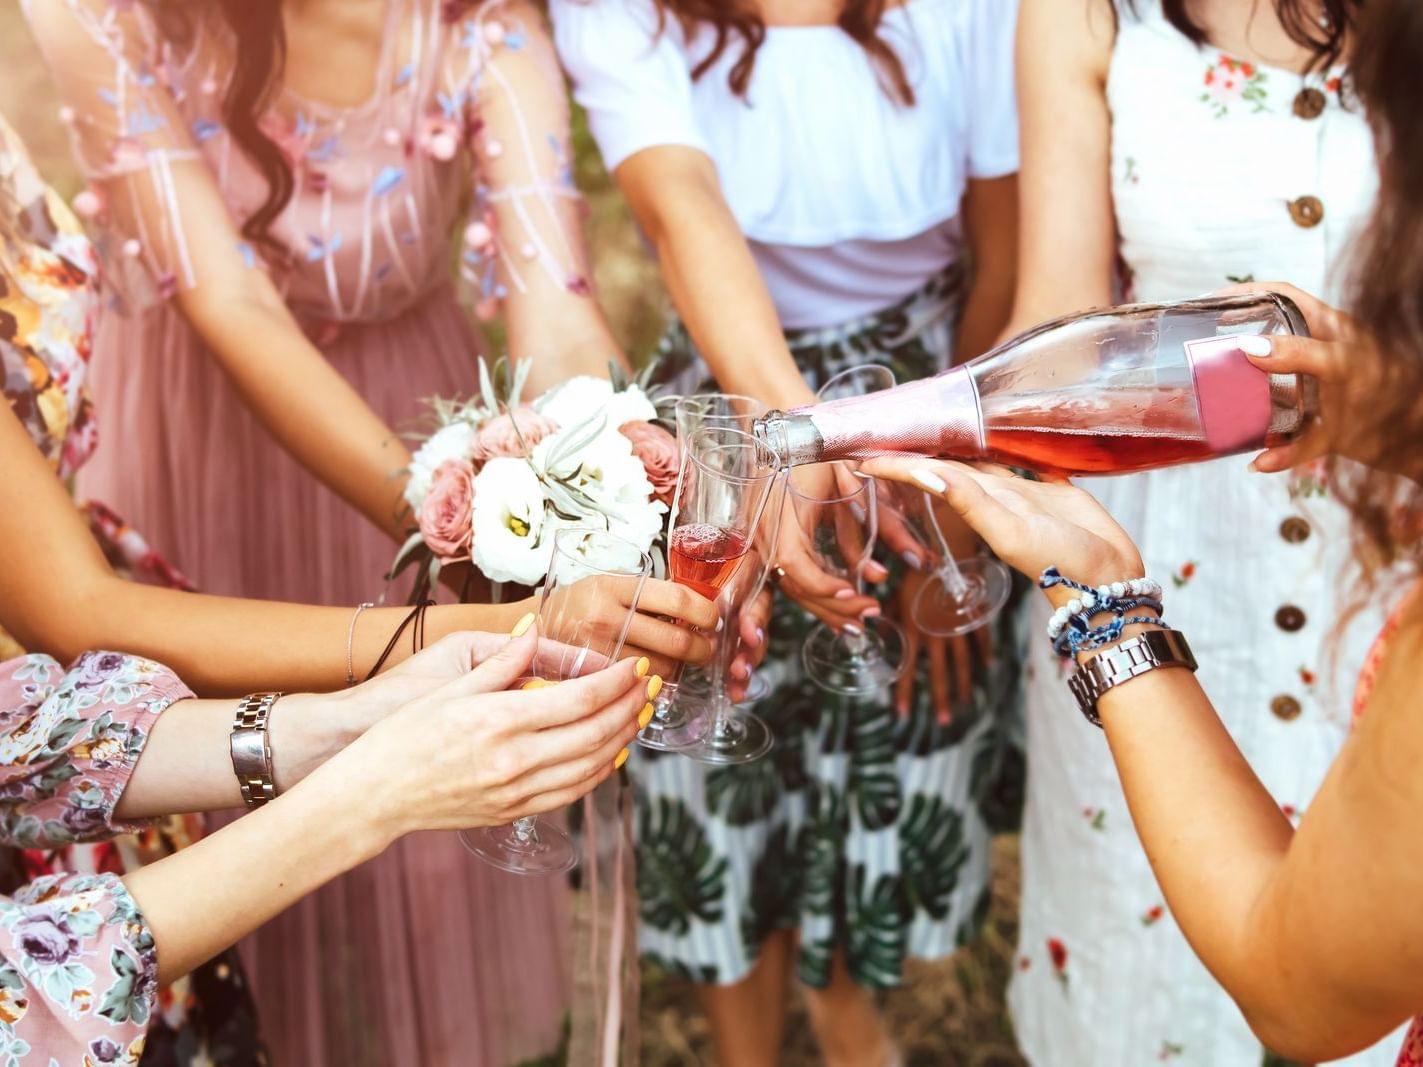 Girls celebrating a hens party with champagne, La Colección